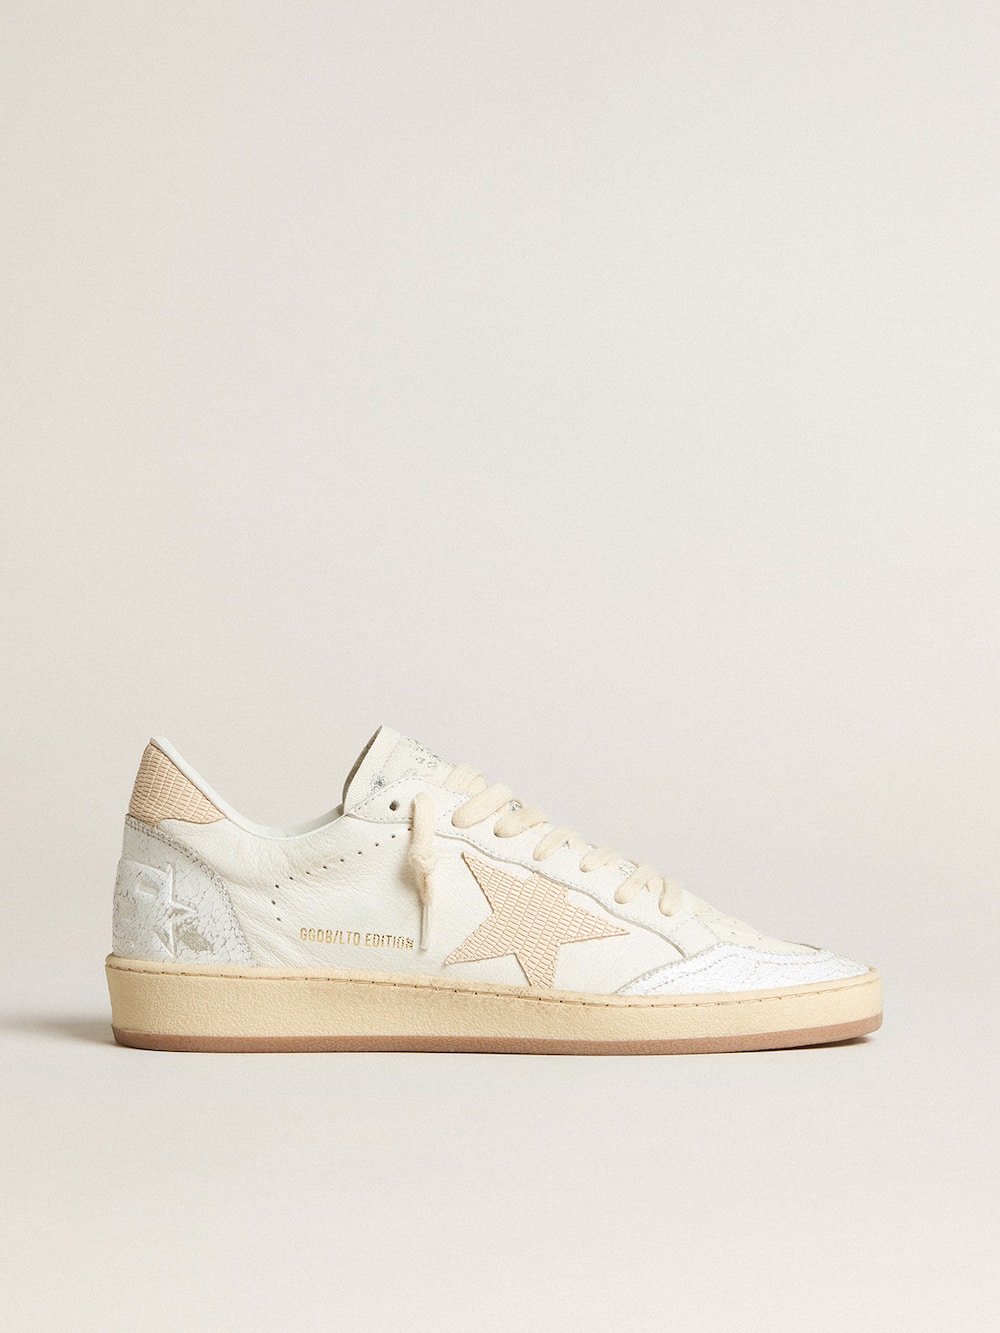 Golden Goose - Men’s Ball Star LTD CNY in white leather with ivory star in 